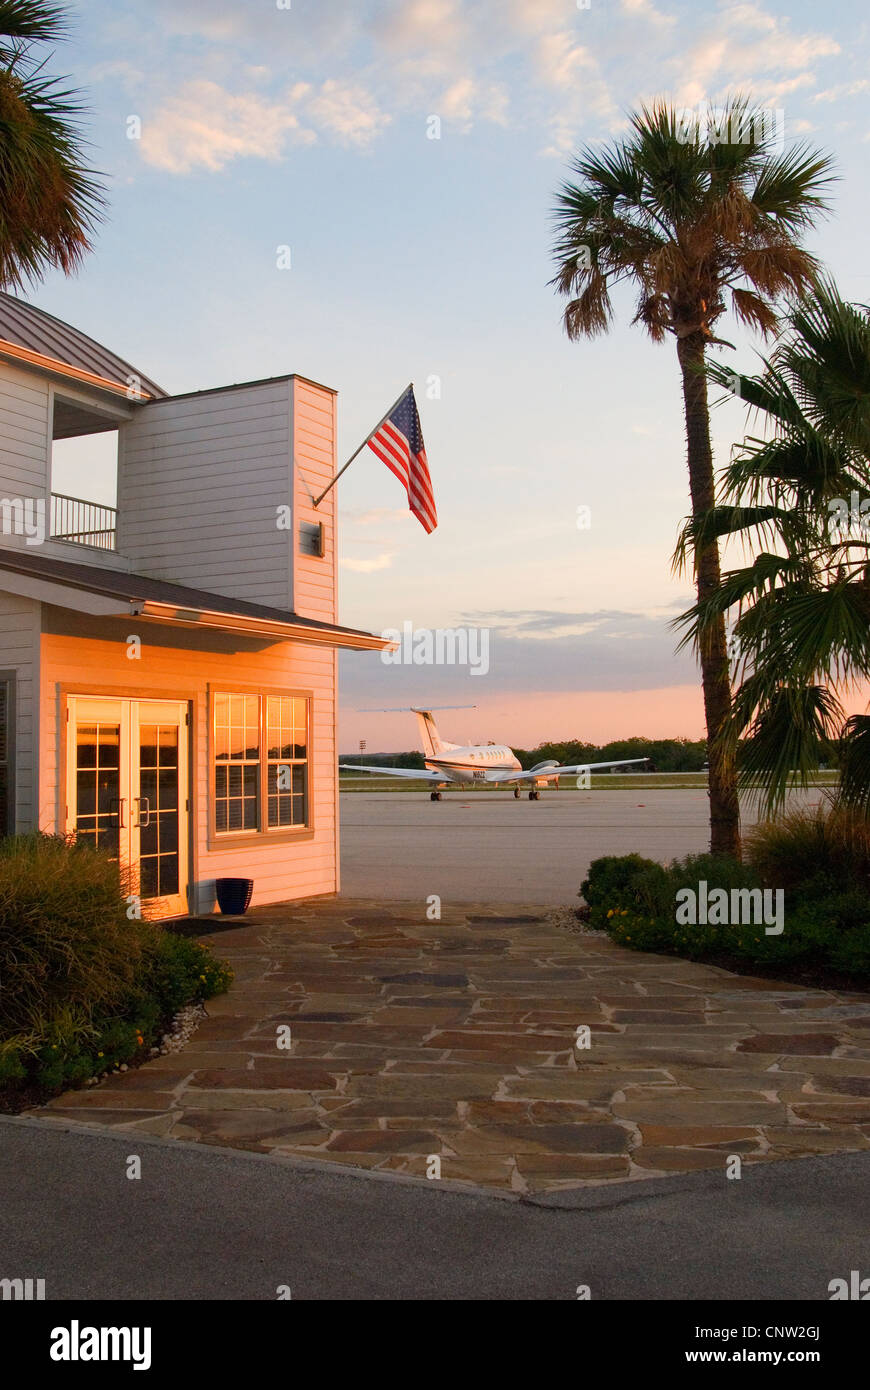 Exterior of the Hangar Hotel, a lodge with aviation themes built beside an airstrip. Stock Photo